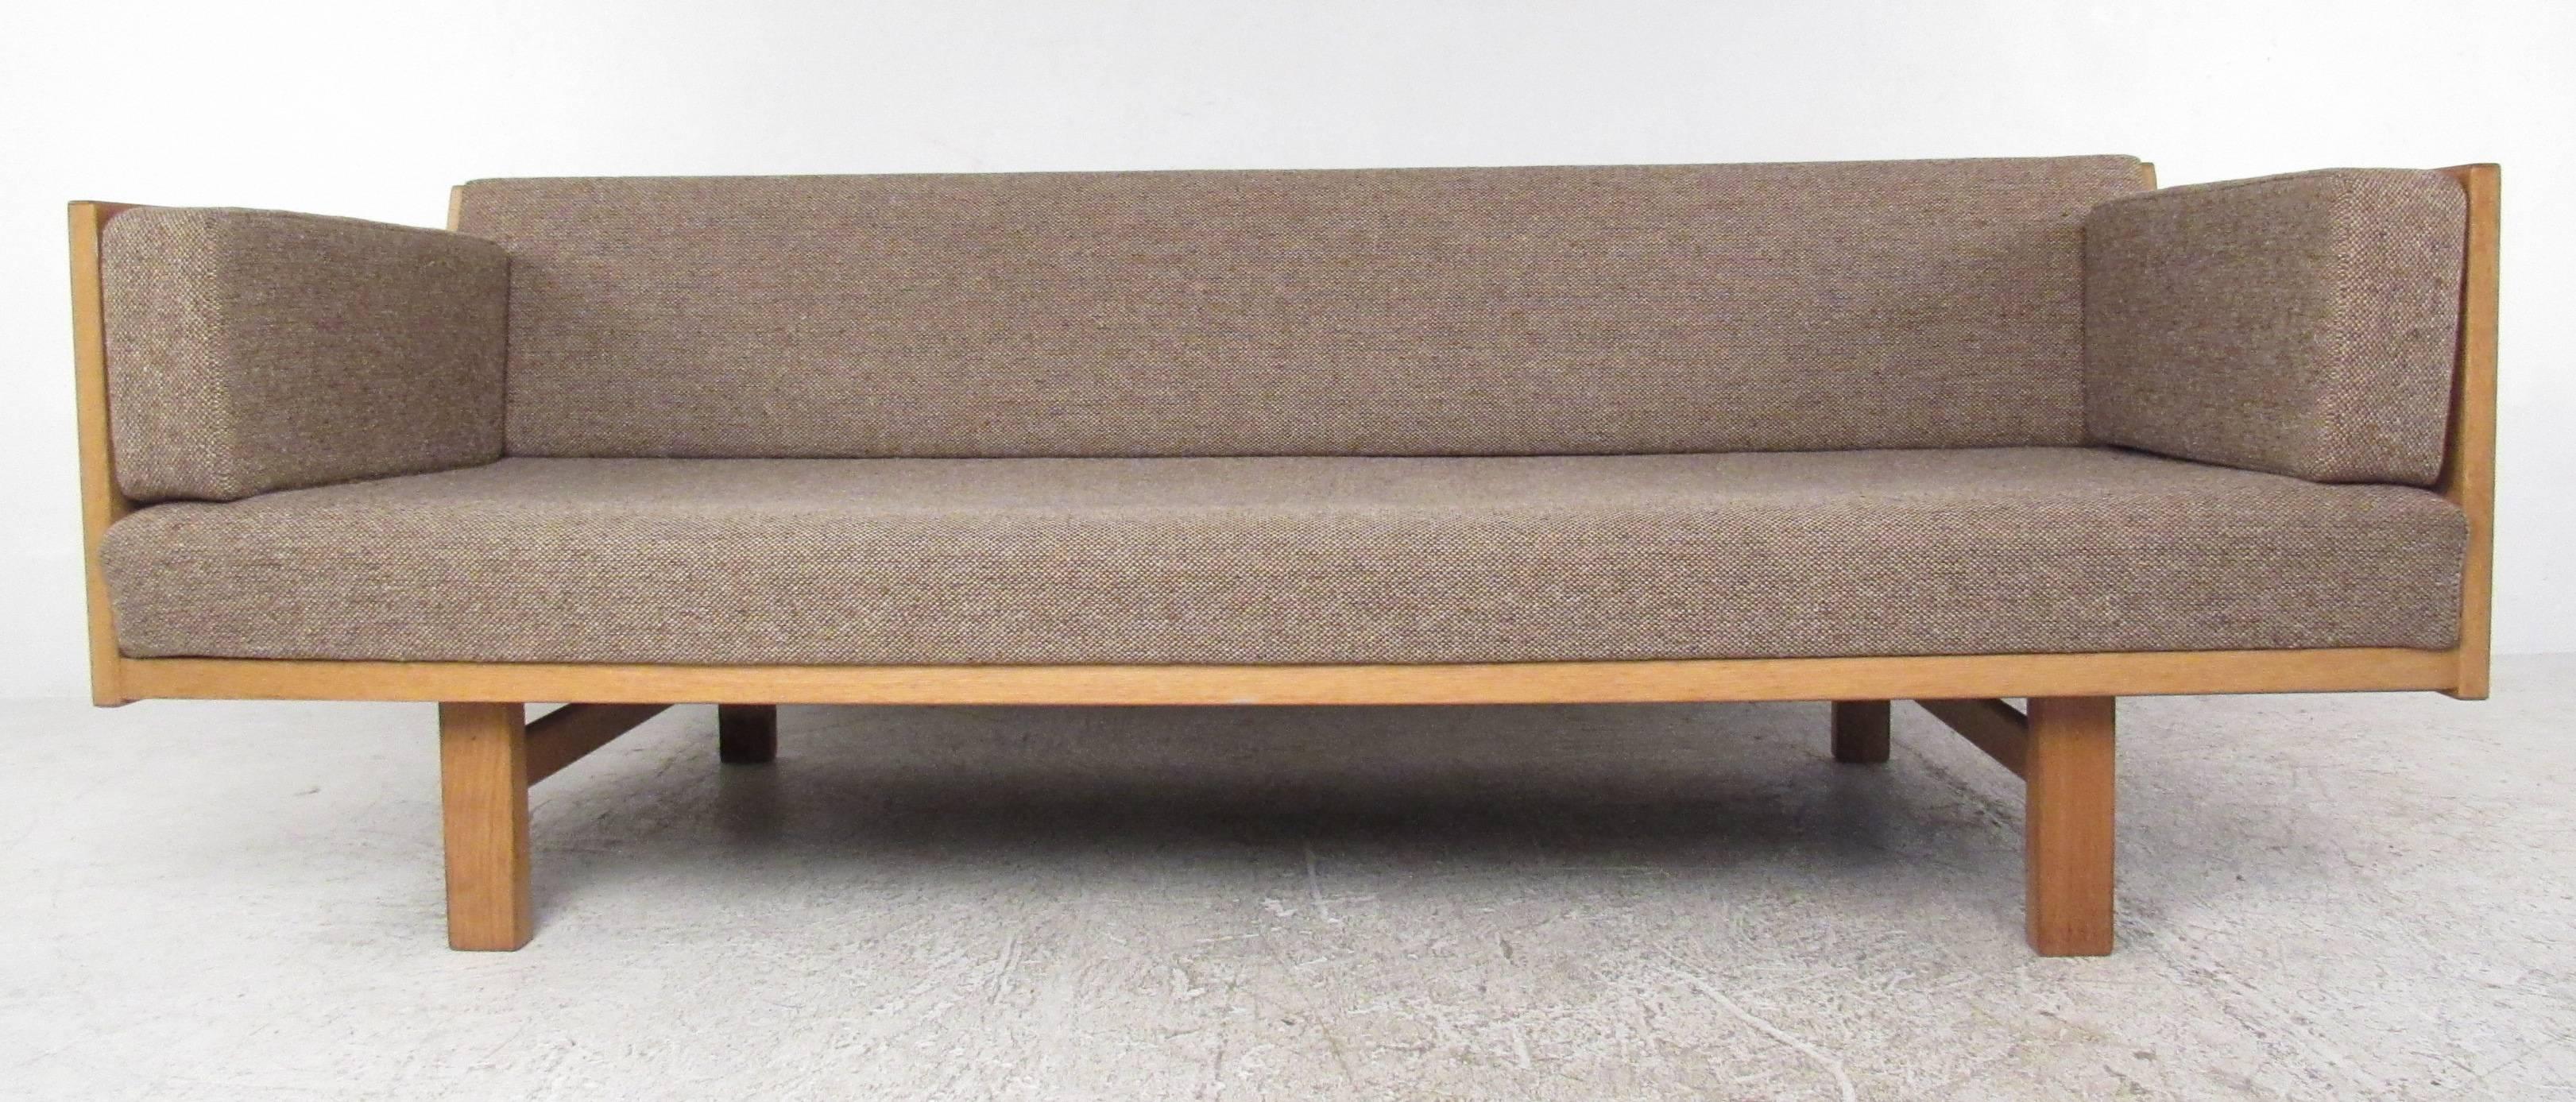 Hans J. Wegner GE 259 daybed in oak, upholstered in fabric. Manufactured by GETAMA in Denmark.
Please confirm item location (NY or NJ) with dealer.